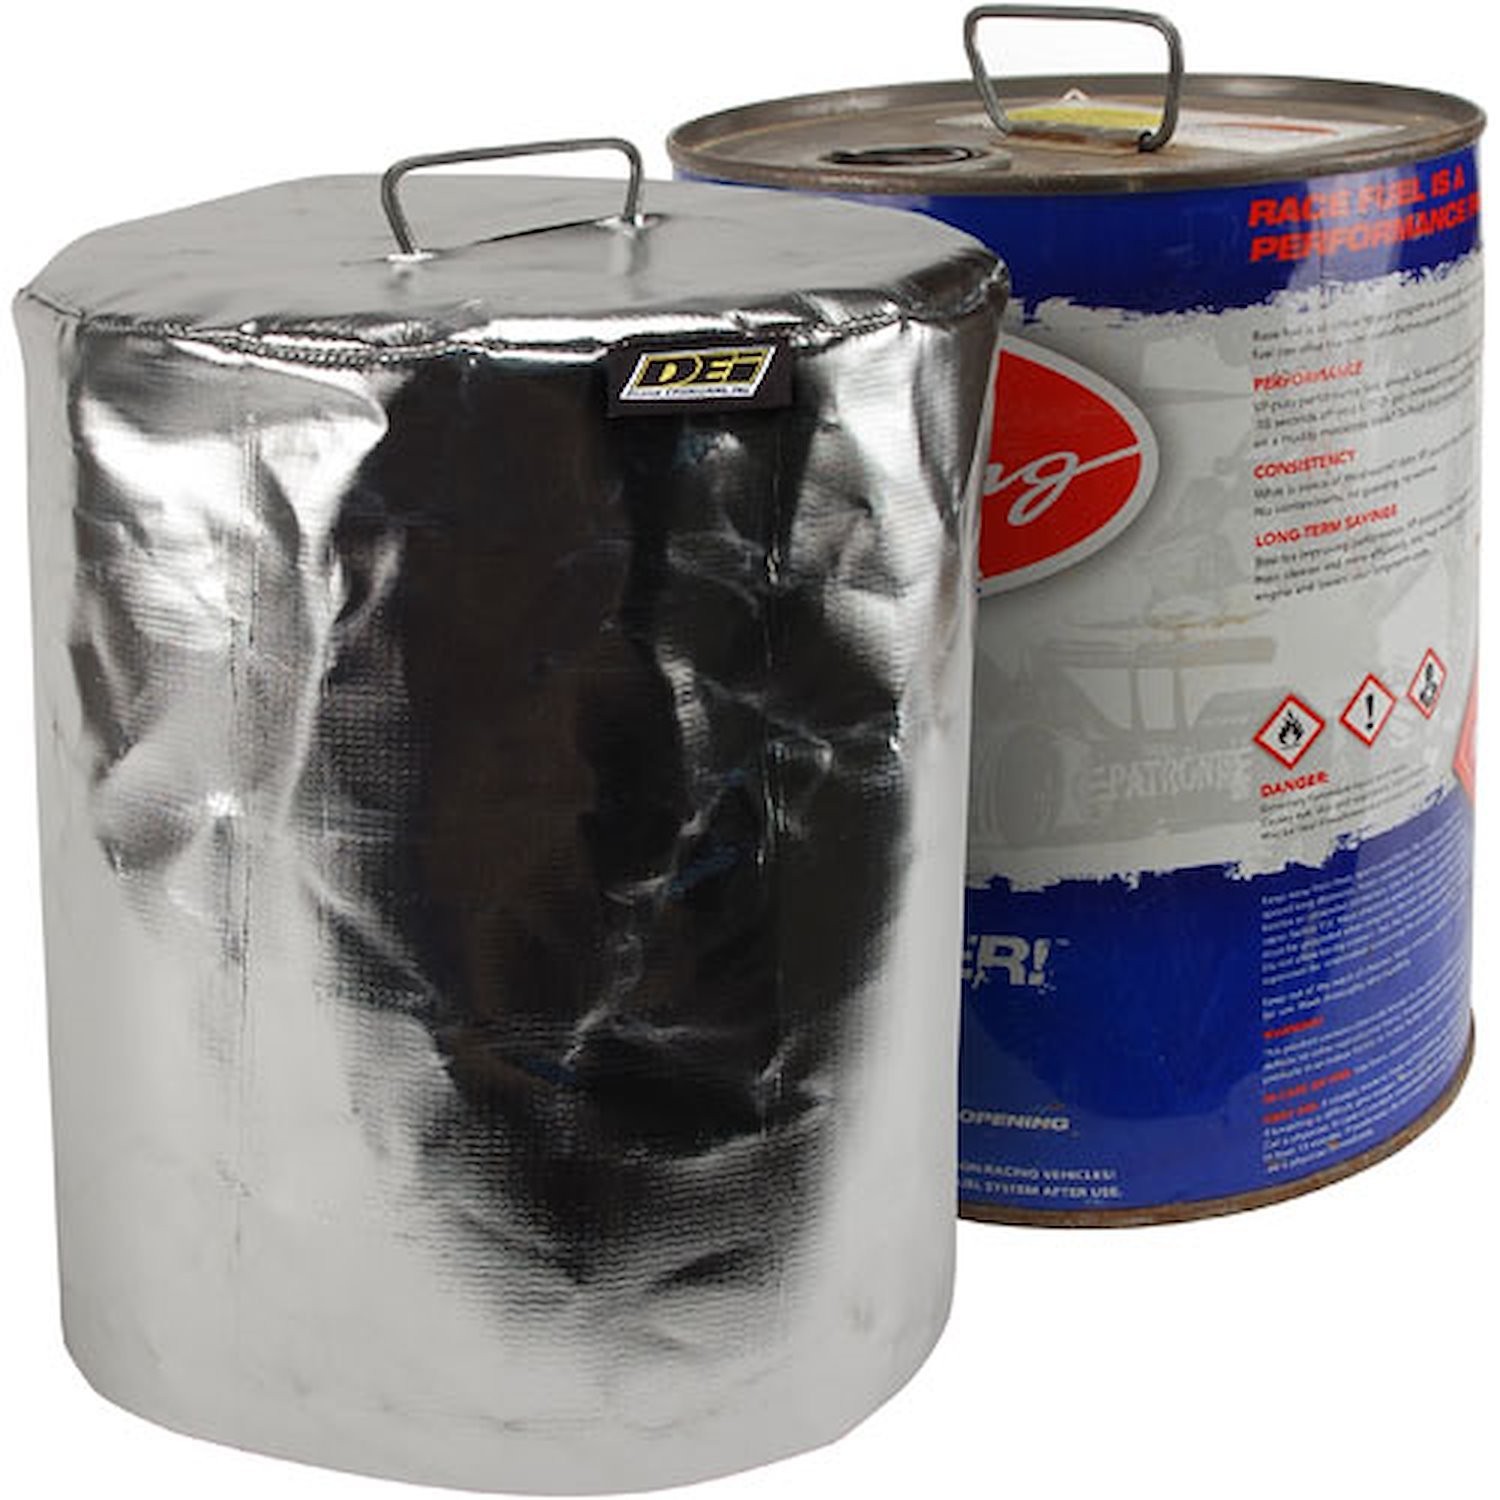 Reflective Fuel Can Cover Fits Standard 5 Gallon Metal Race Fuel Cans